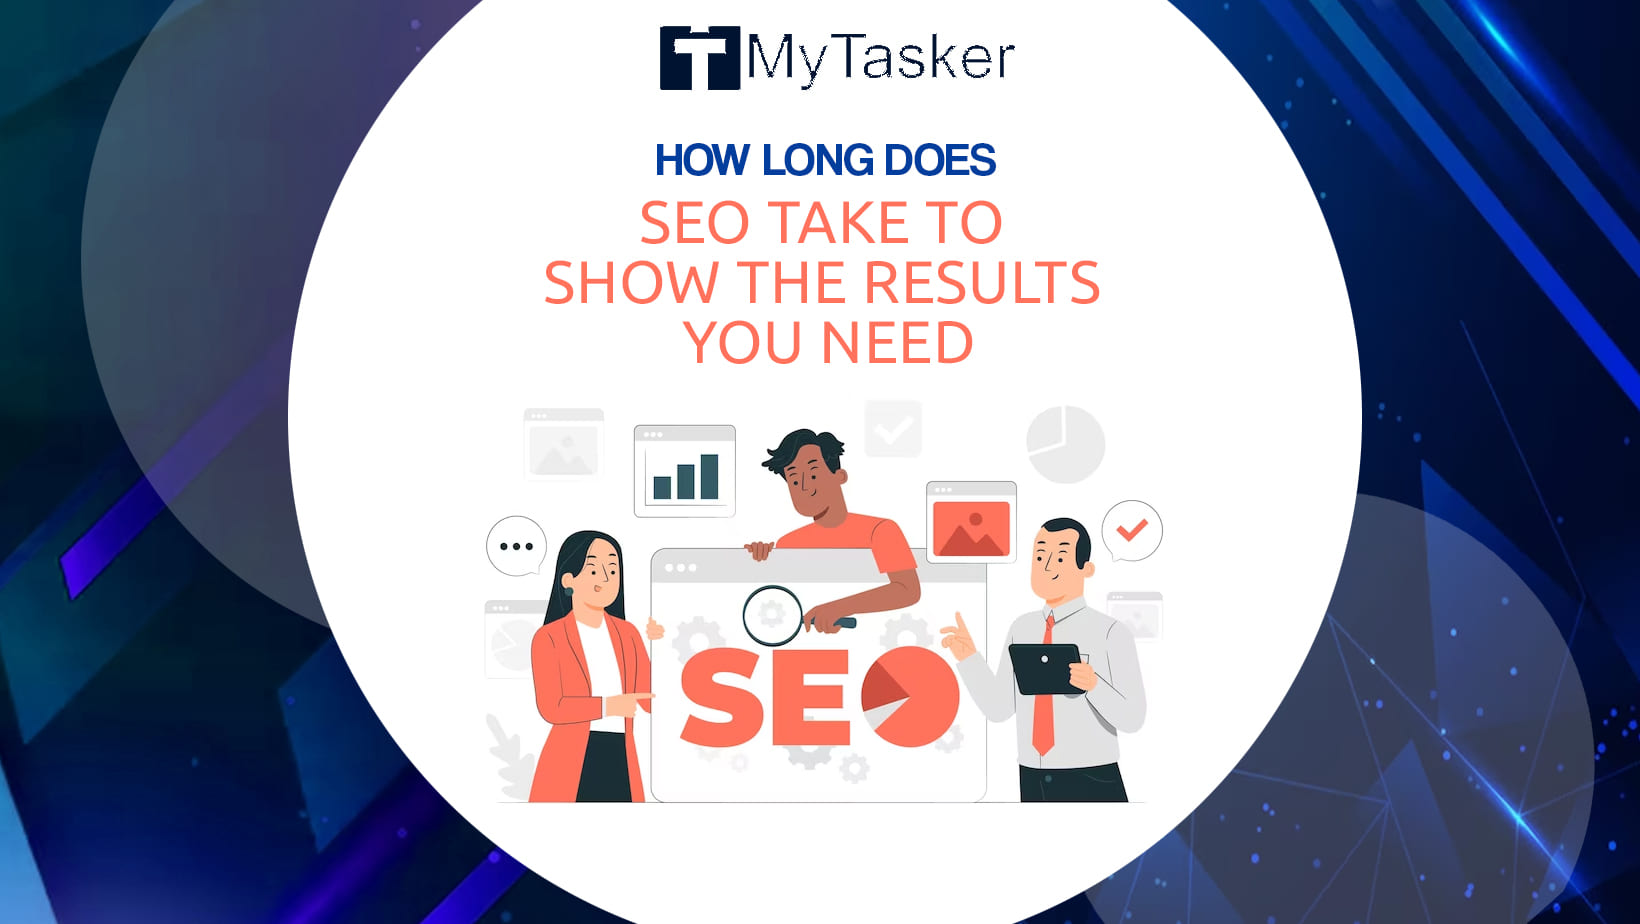 How Long Does SEO Take to Show The Desired Results?